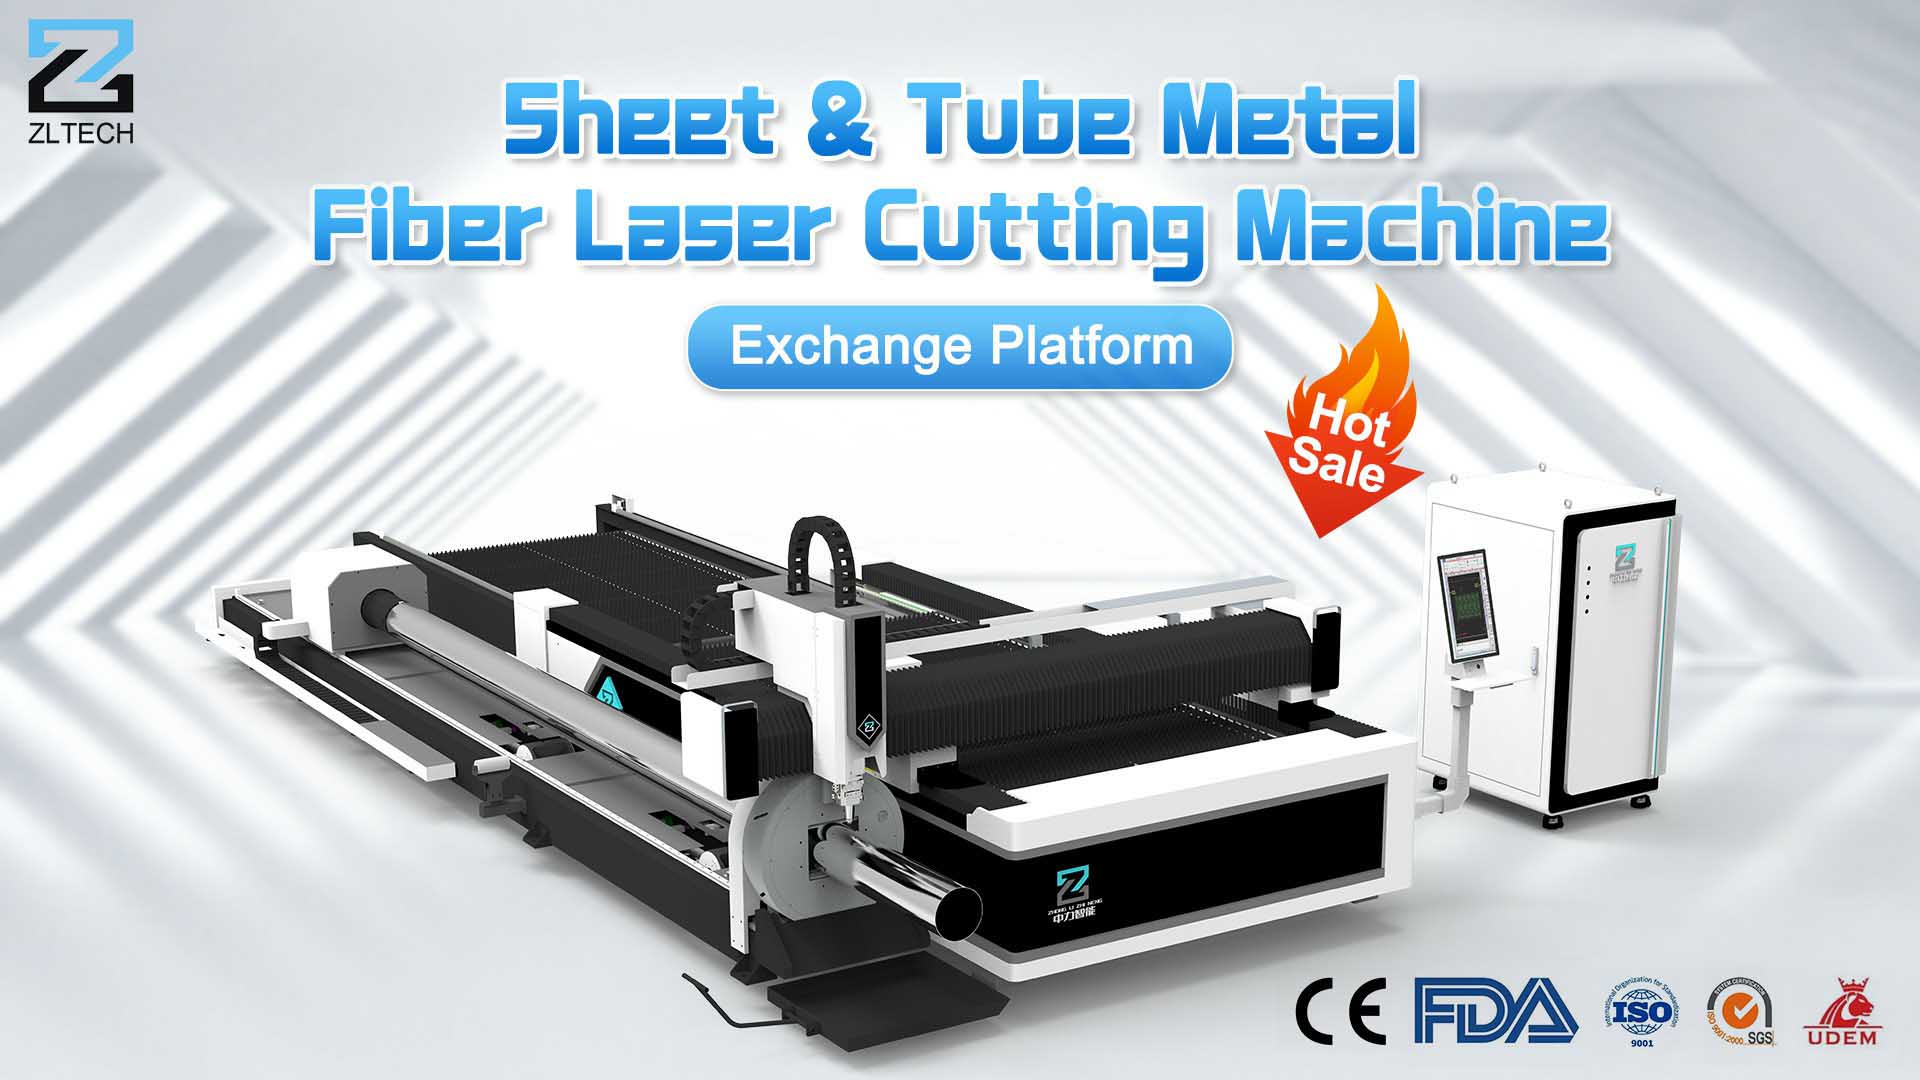 Sheet and Tube Metal Fiber Laser Cutting Machine with Exchanging Table